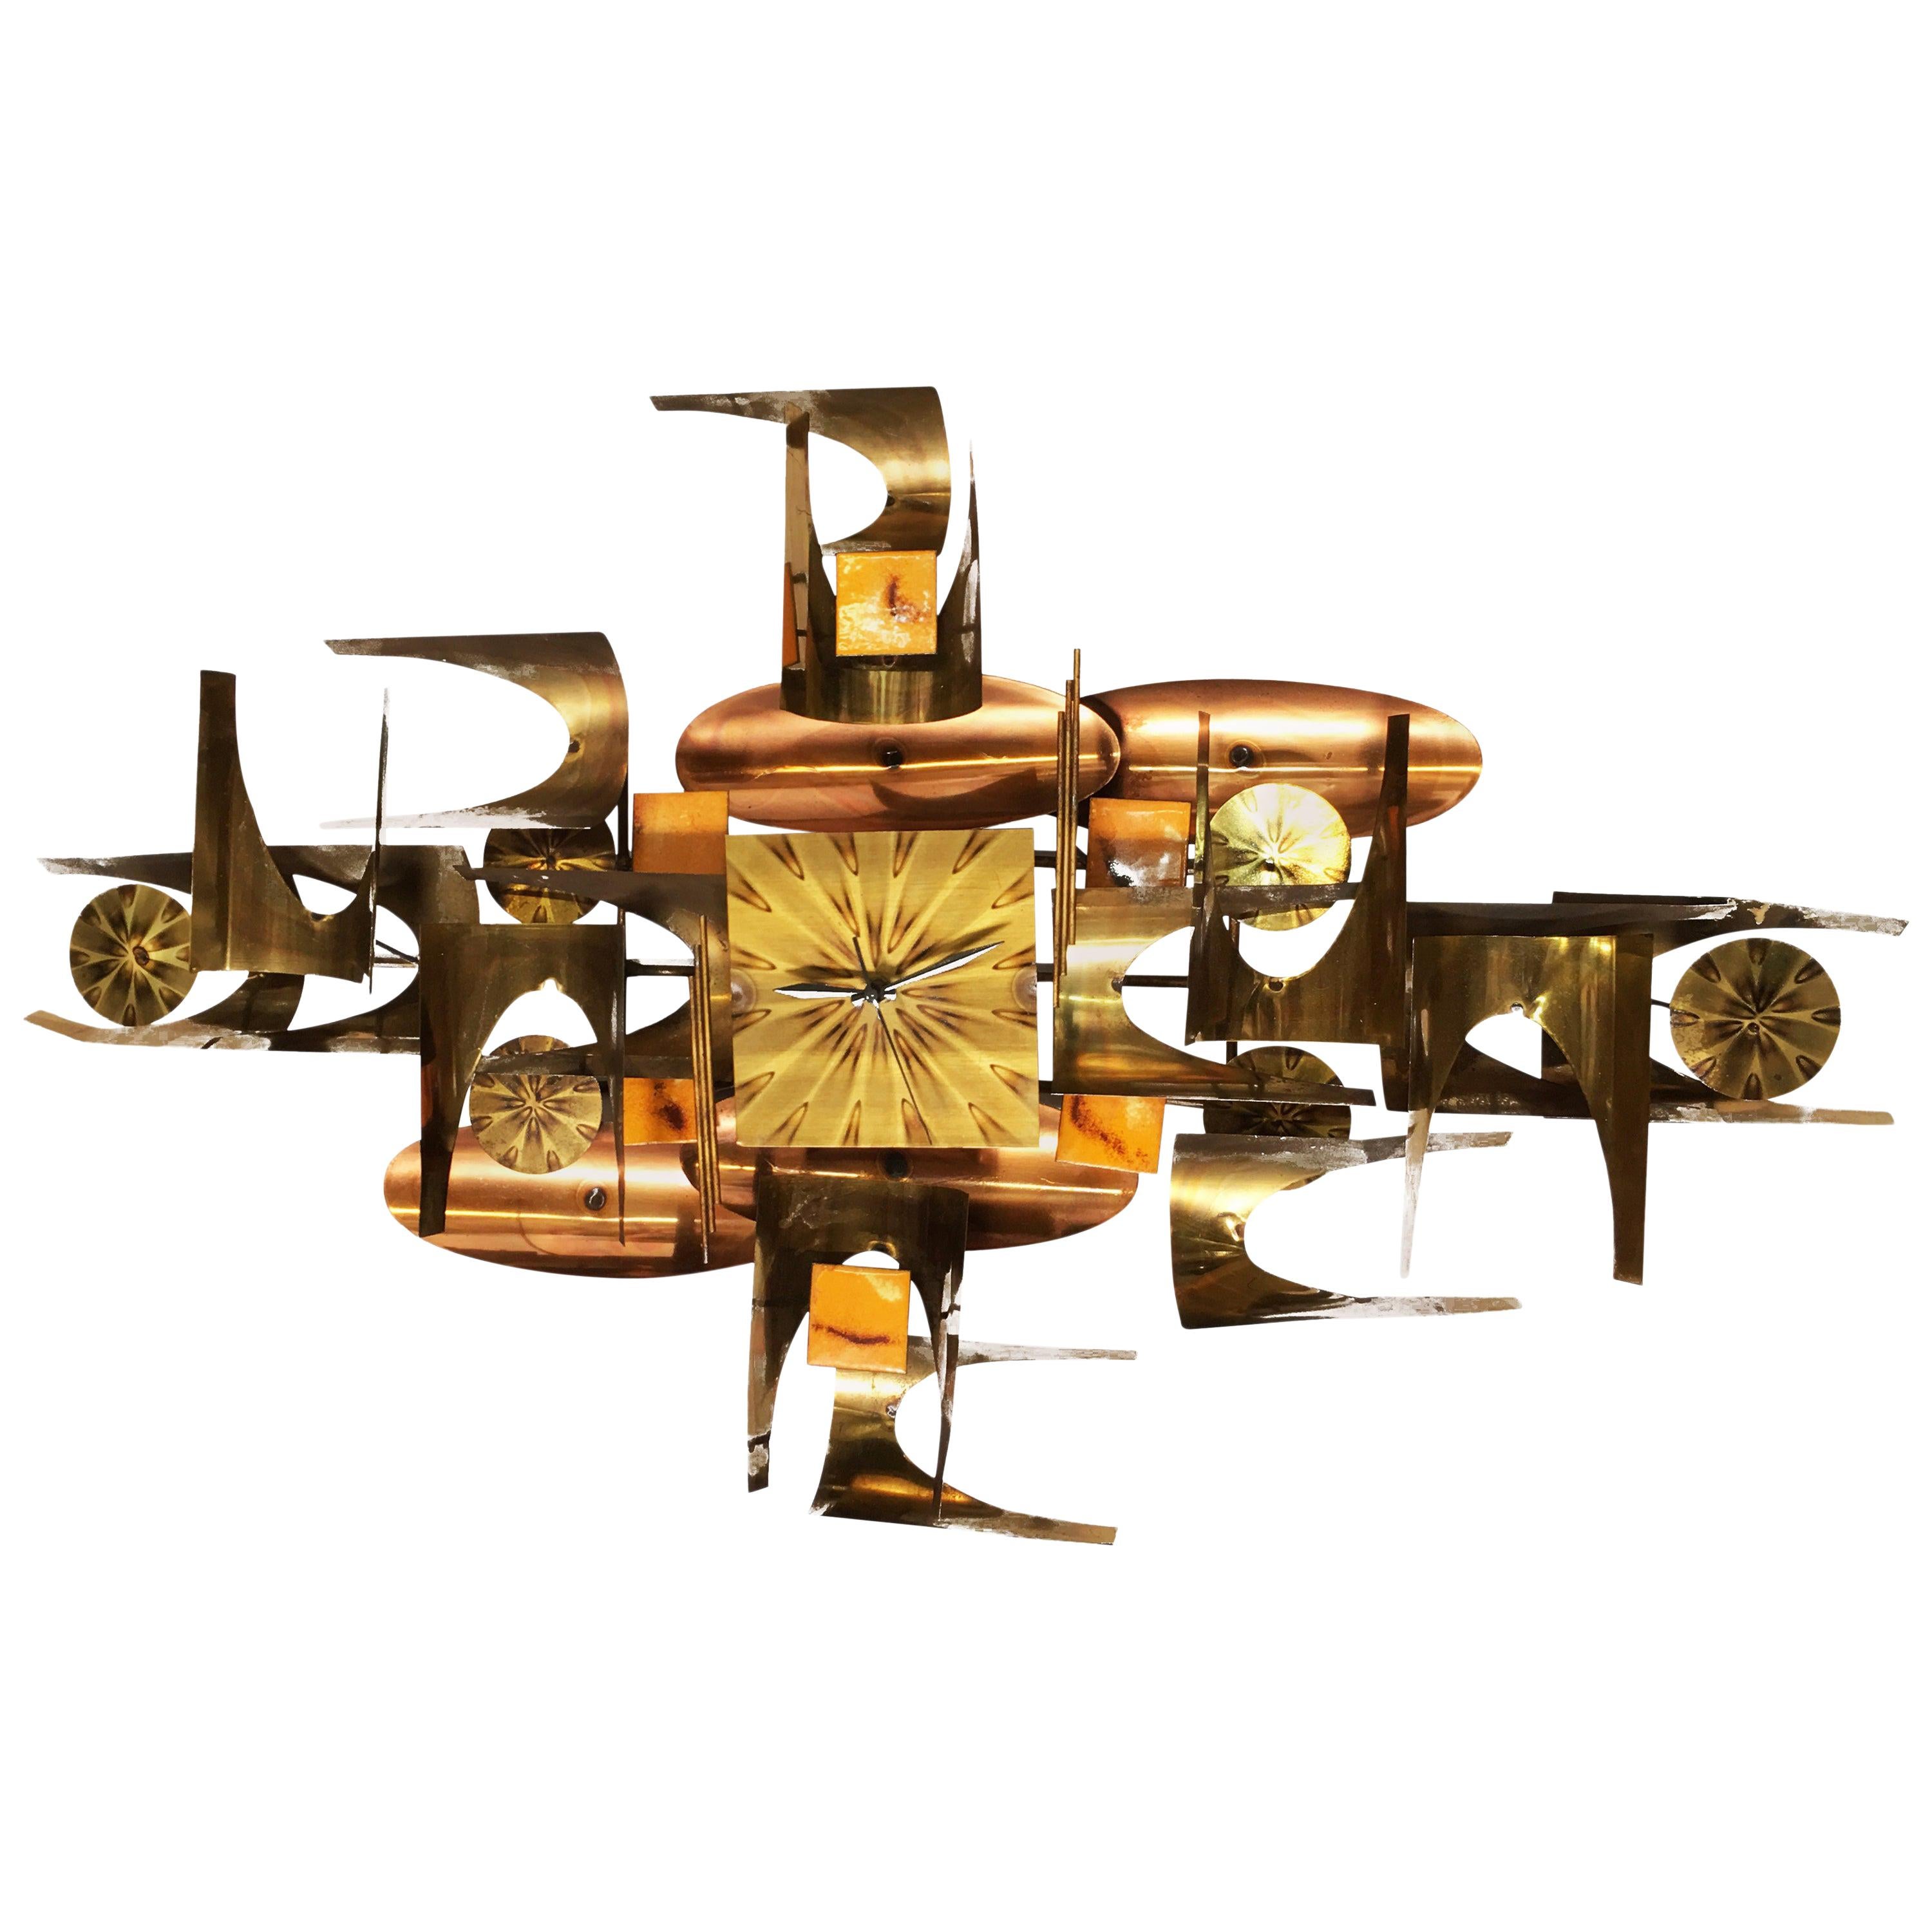 William Vose for Curtis Jere Brass and Copper Brutalist Wall Sculpture Clock